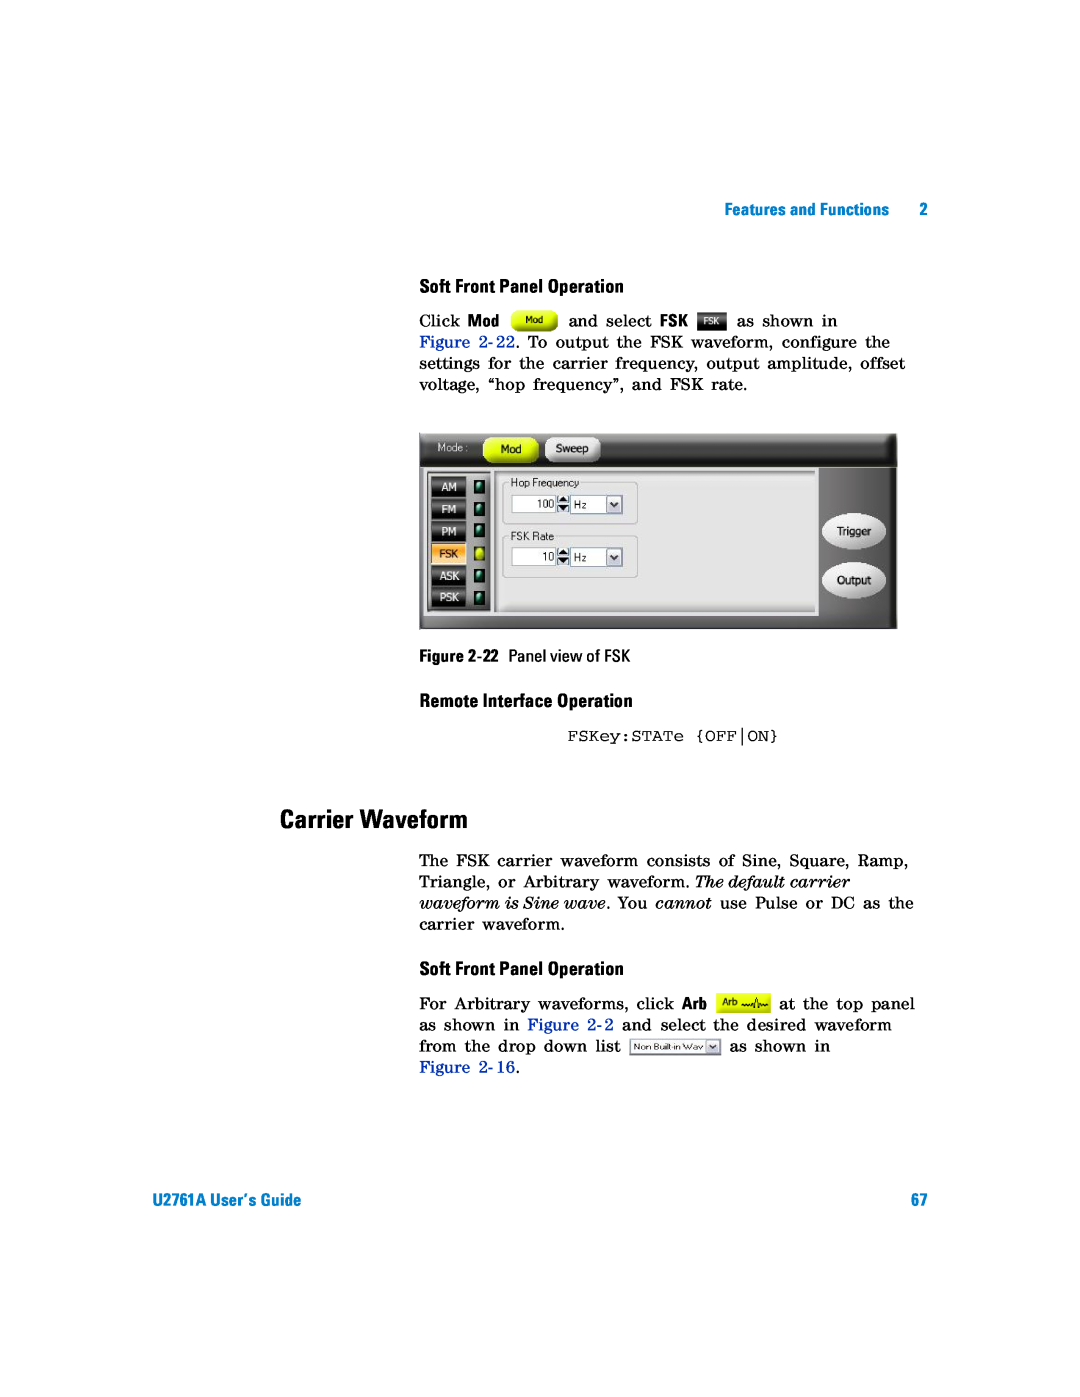 Agilent Technologies Carrier Waveform, Soft Front Panel Operation, Remote Interface Operation, U2761A User’s Guide 